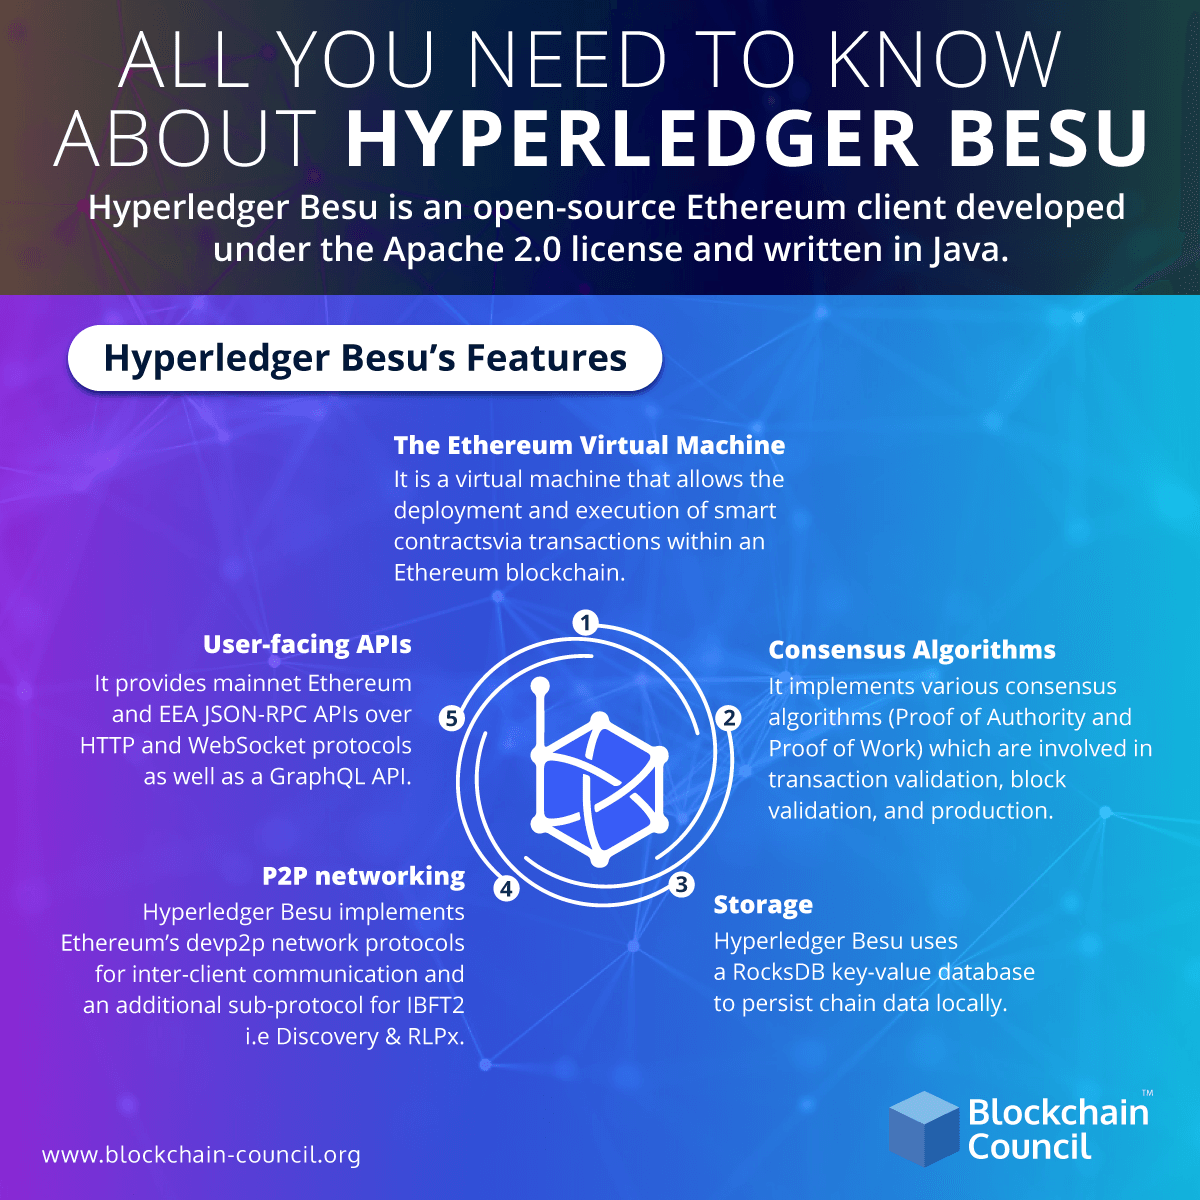 All You Need To Know About Hyperledger Besu